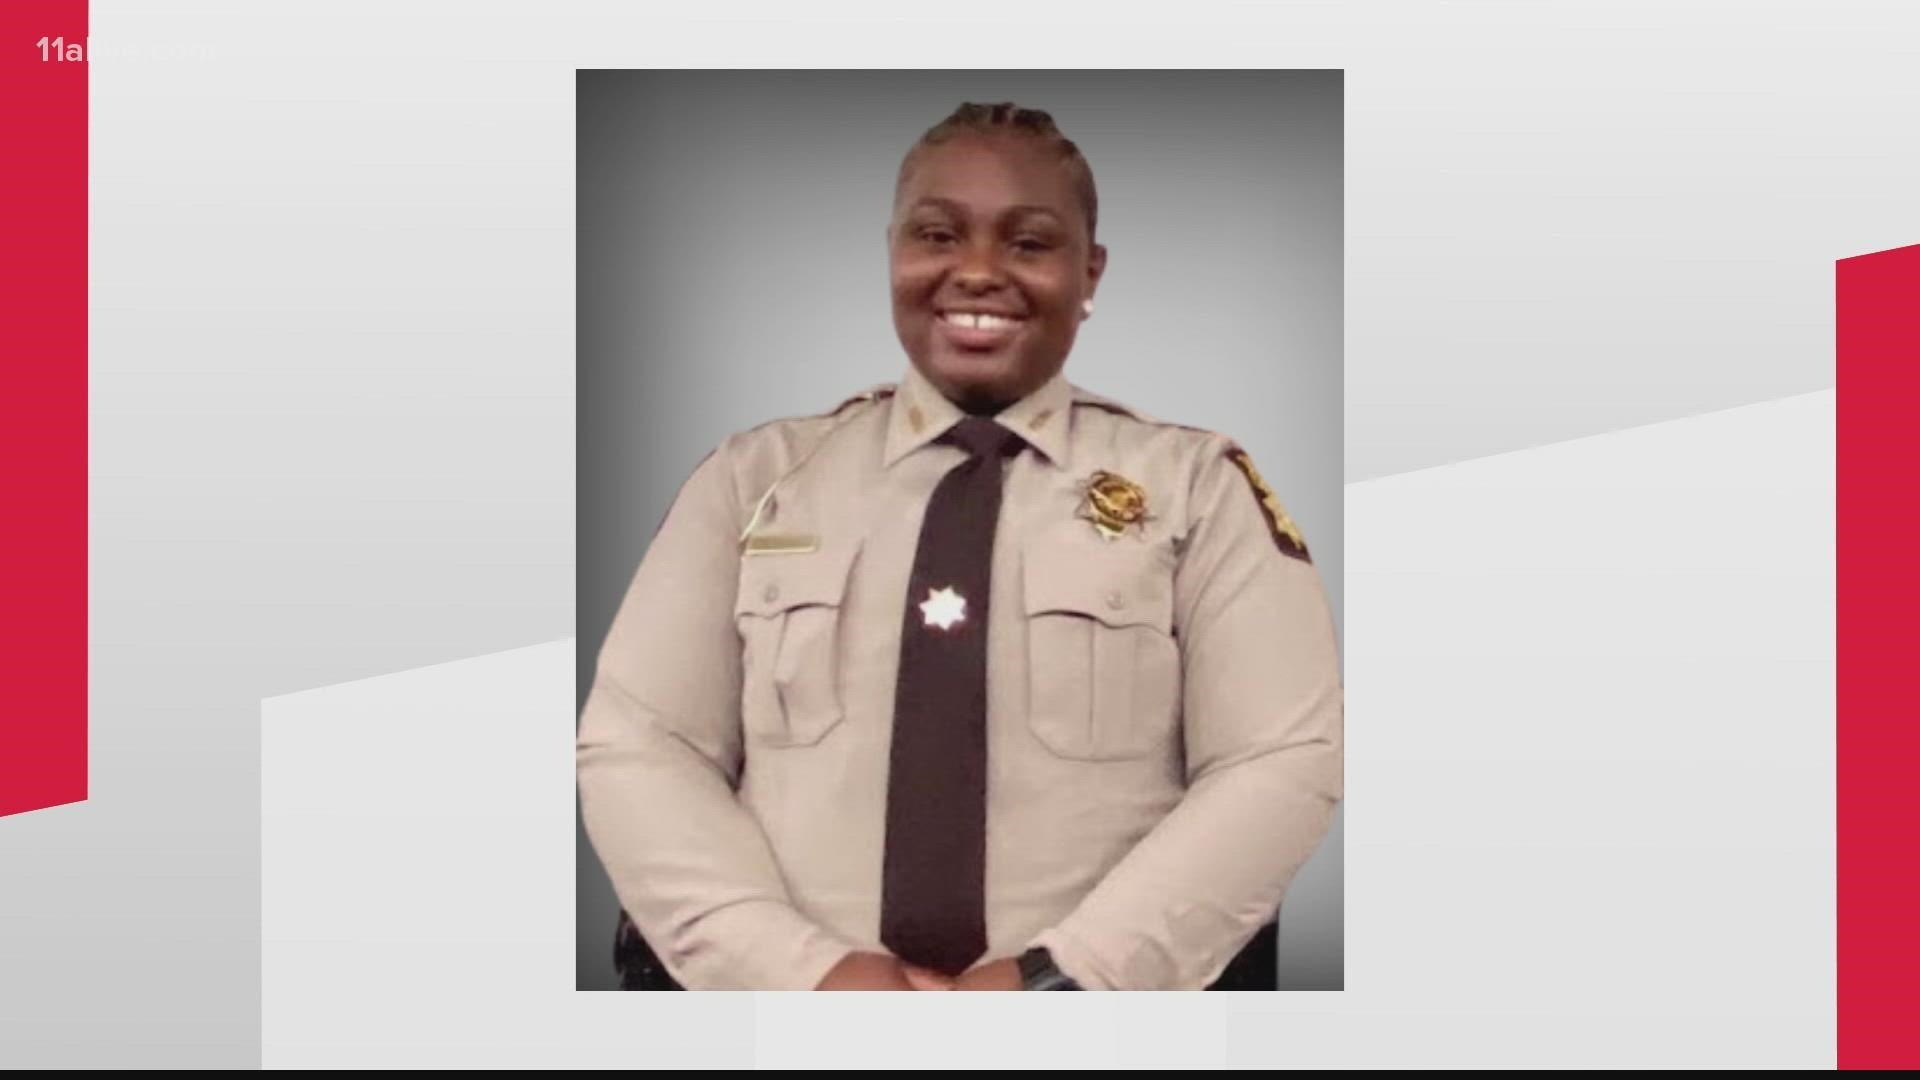 Deputy Shakeema Jackson had been with the department since 2018 and had just become a deputy a month ago.